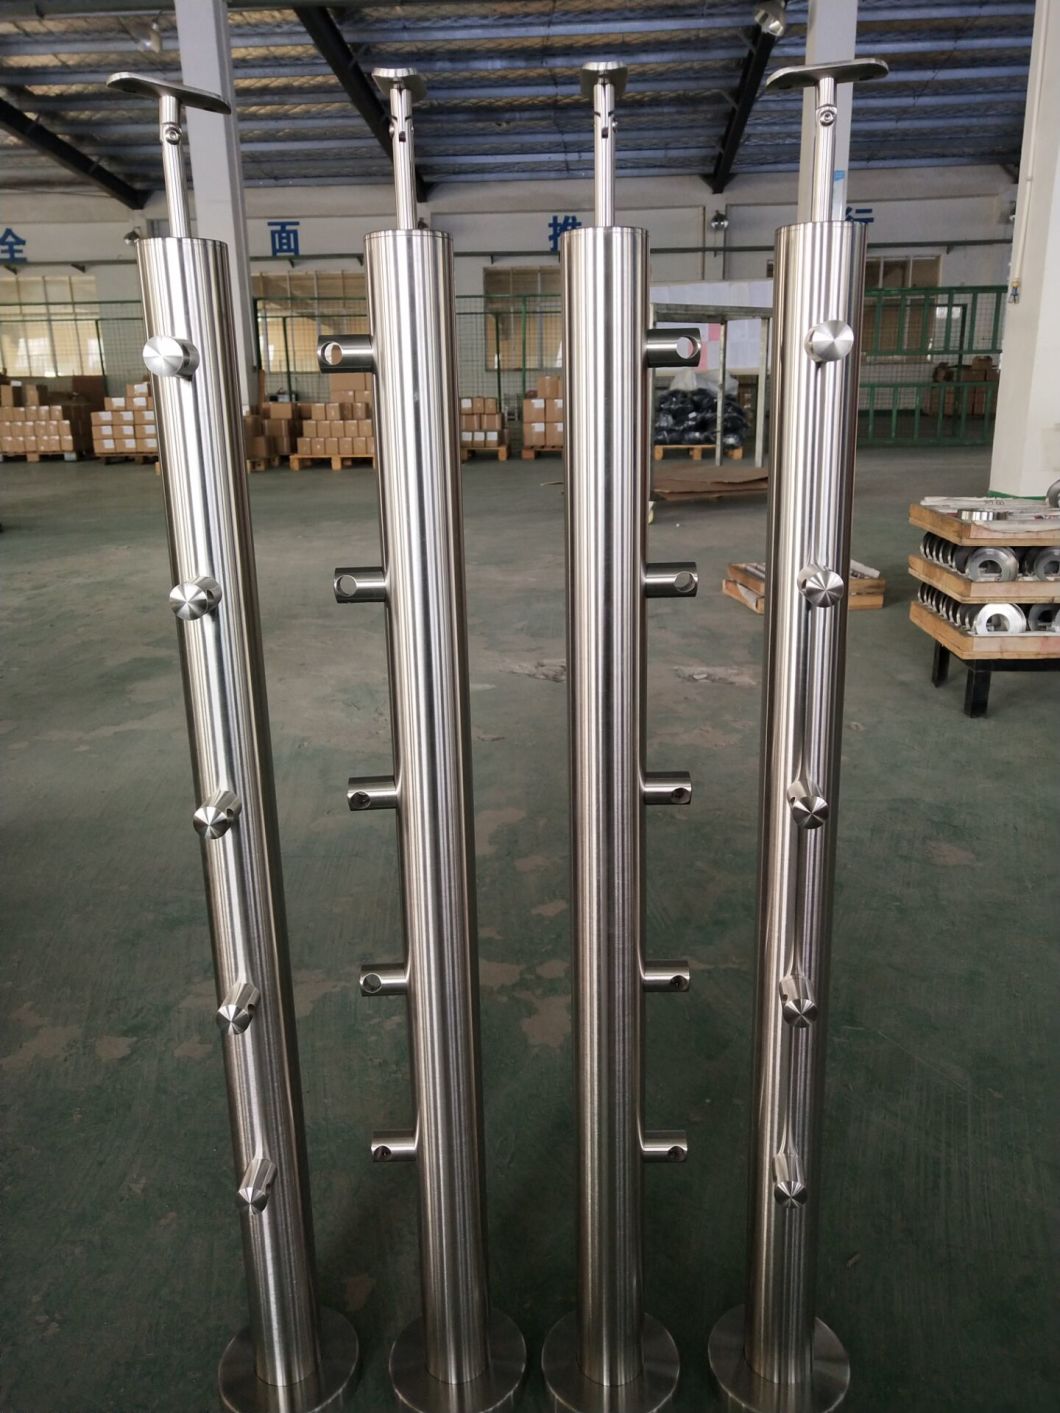 Stainless Steel Glass Balustrade for out Door Railings/Glass Railing/Staircase Railing